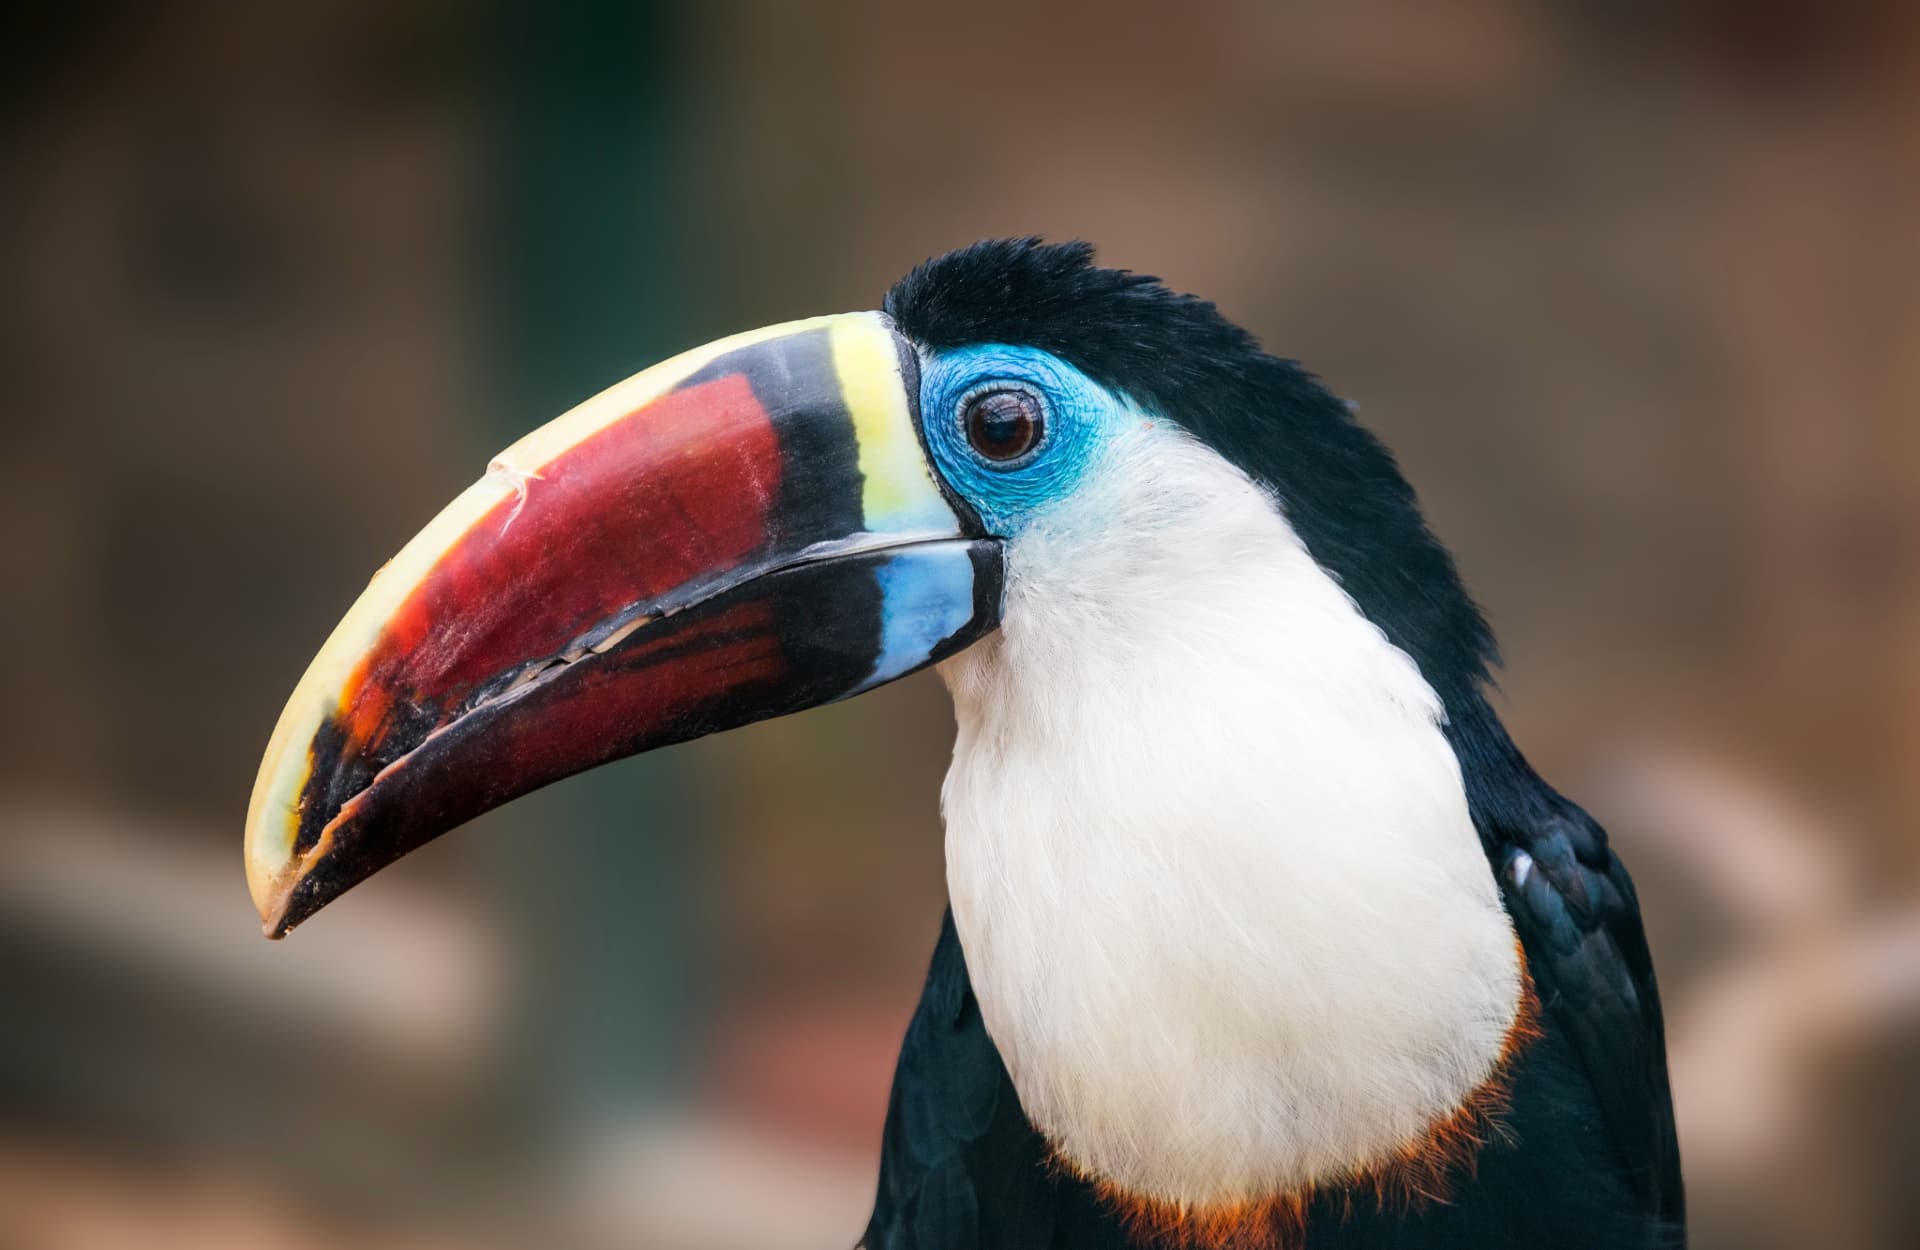 The white throated toucan.